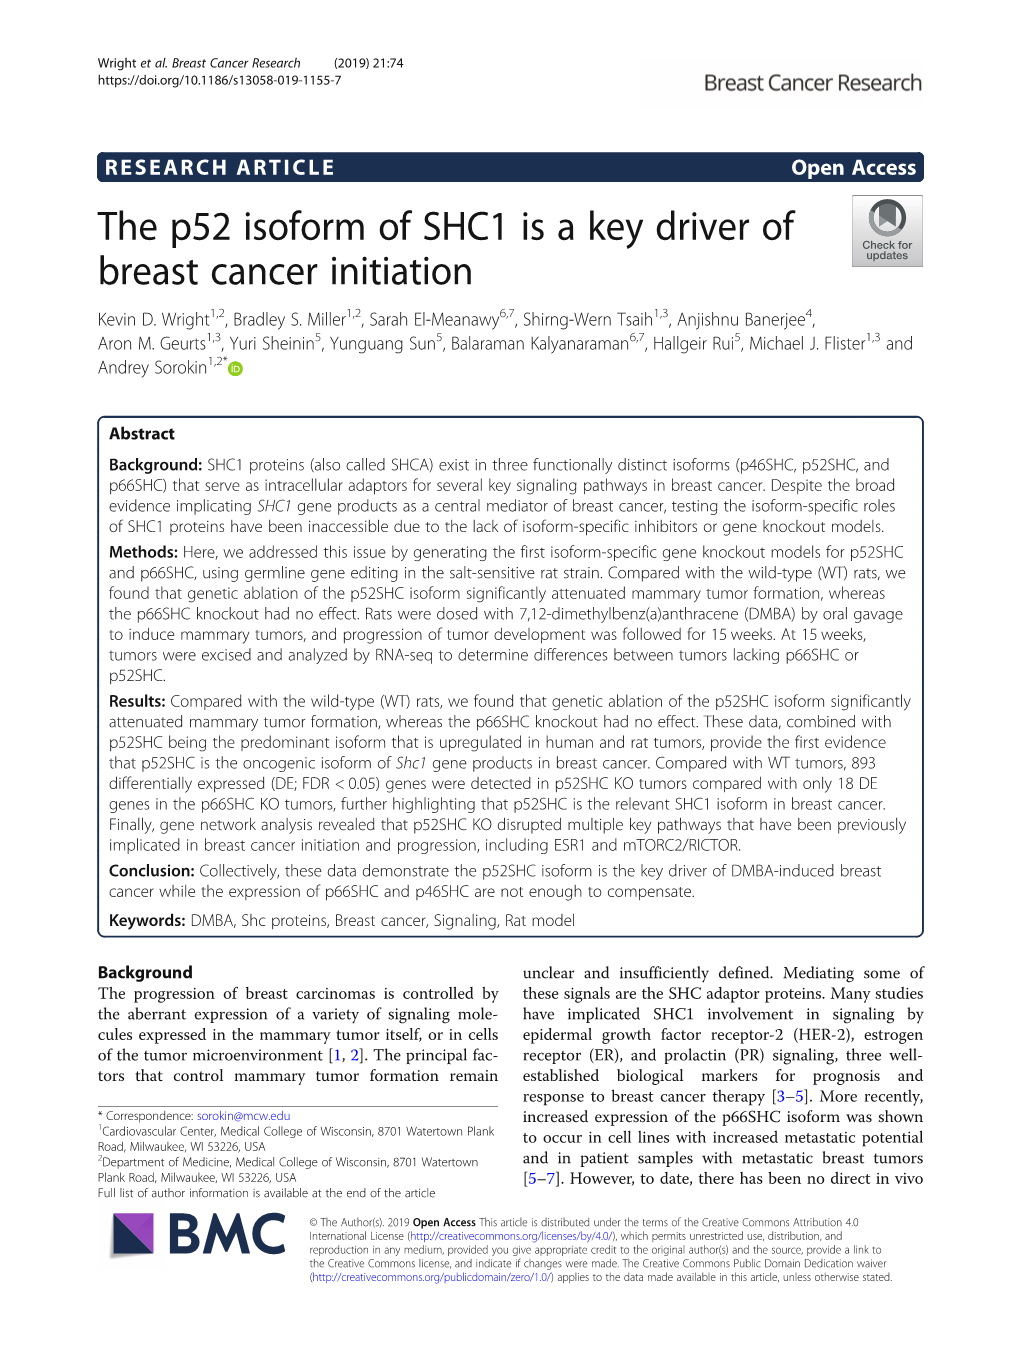 The P52 Isoform of SHC1 Is a Key Driver of Breast Cancer Initiation Kevin D